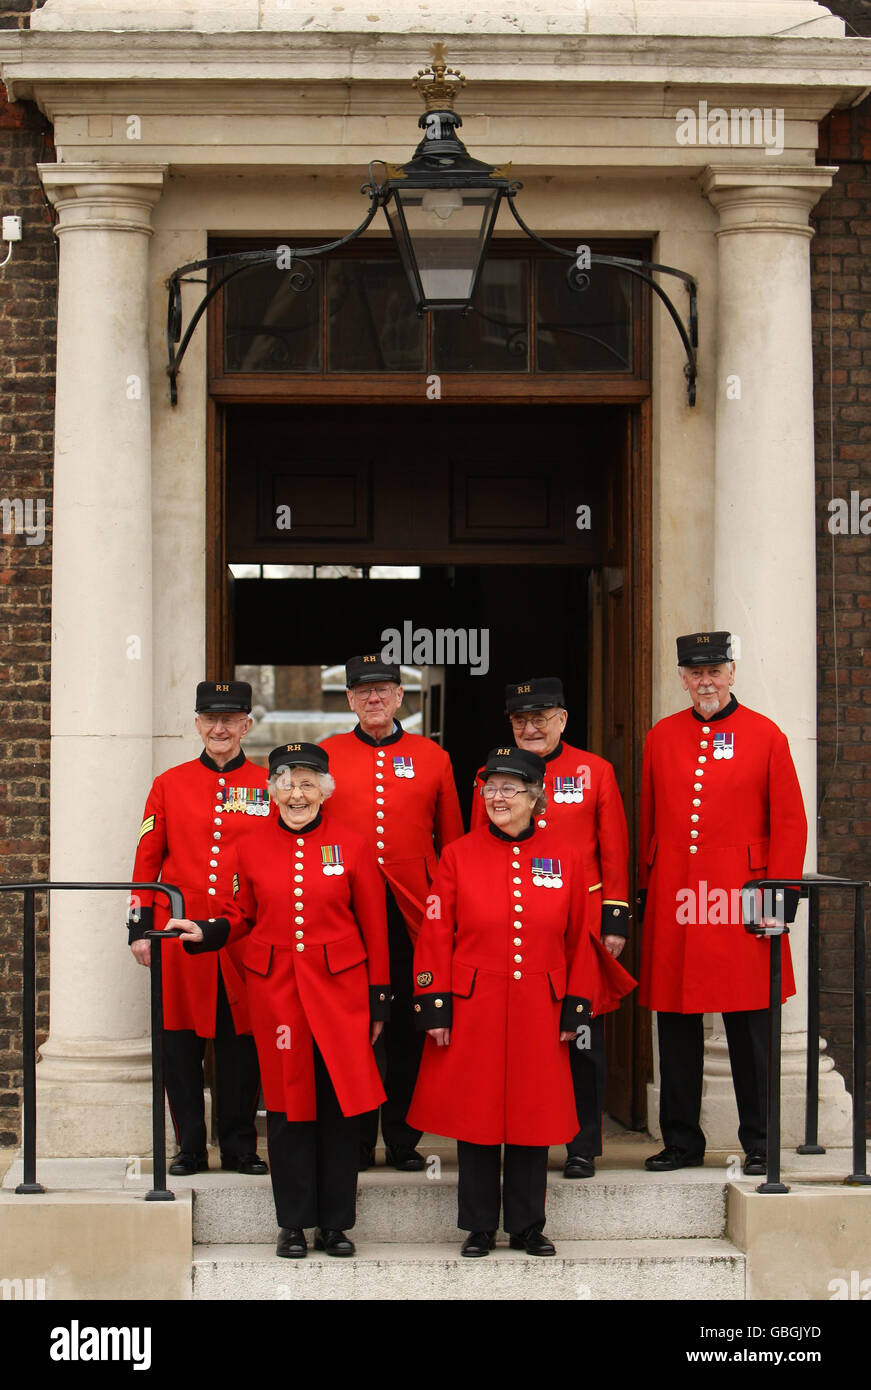 Winifred Phillips (front left) and Dorothy Hughes (front right) are welcomed by Chelsea Pensioners (back left to right) Lewis Prangle, Geoff Crowther, Ralph Dickinson and Alan Swain as the first women Chelsea pensioners at the Royal Hospital Chelsea in London. Stock Photo